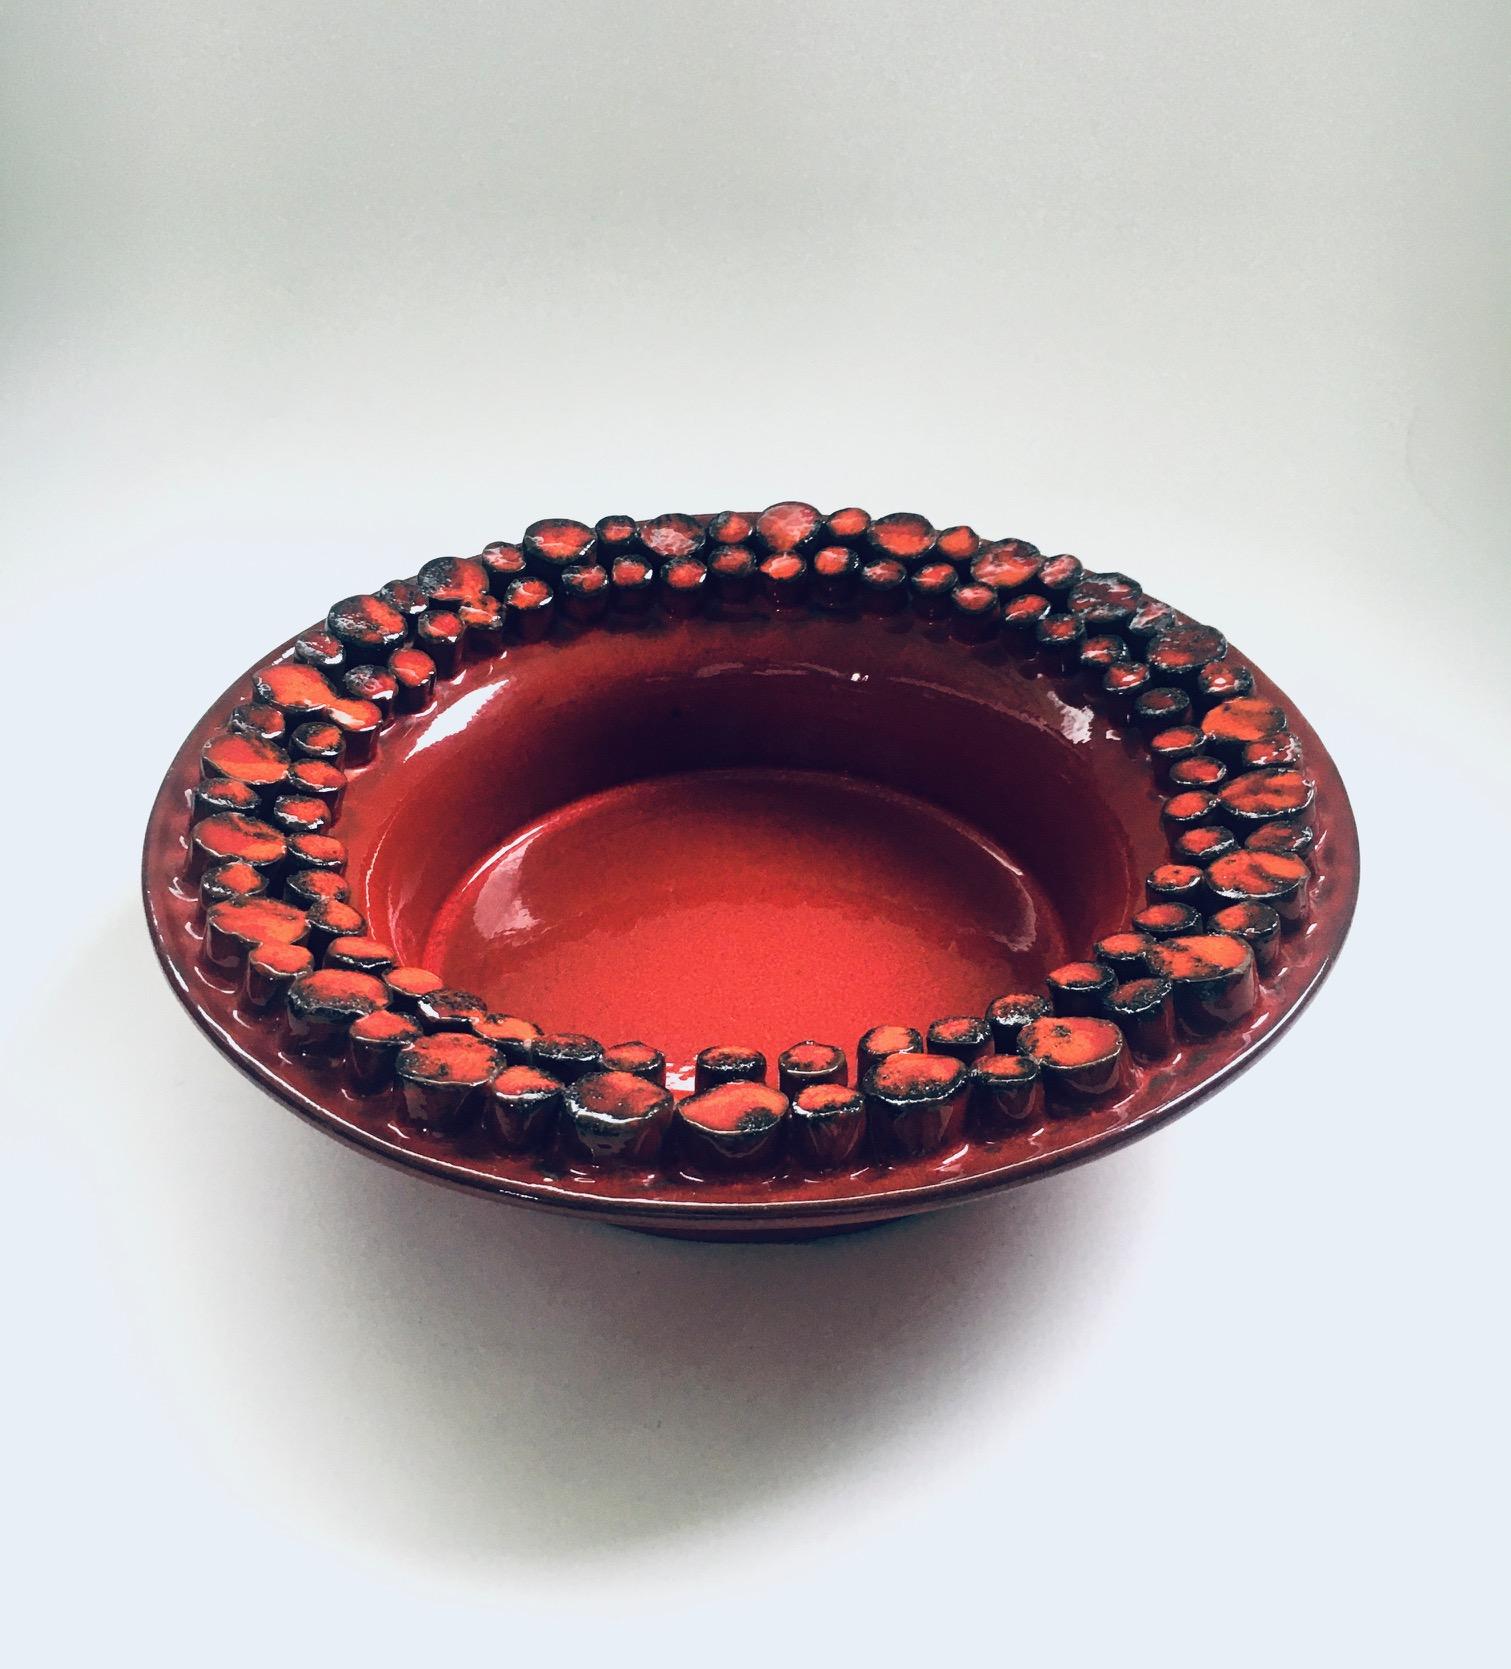 Vintage Midcentury Art Studio Pottery Bowl by Hans (Hanns) Welling for Ceramano Ceralux, West Germany 1960's. Red fat lava glazed ceramic dish. Signed at the bottom. This comes in very good condition. Measures 7,5cm x 25cm x 25cm.